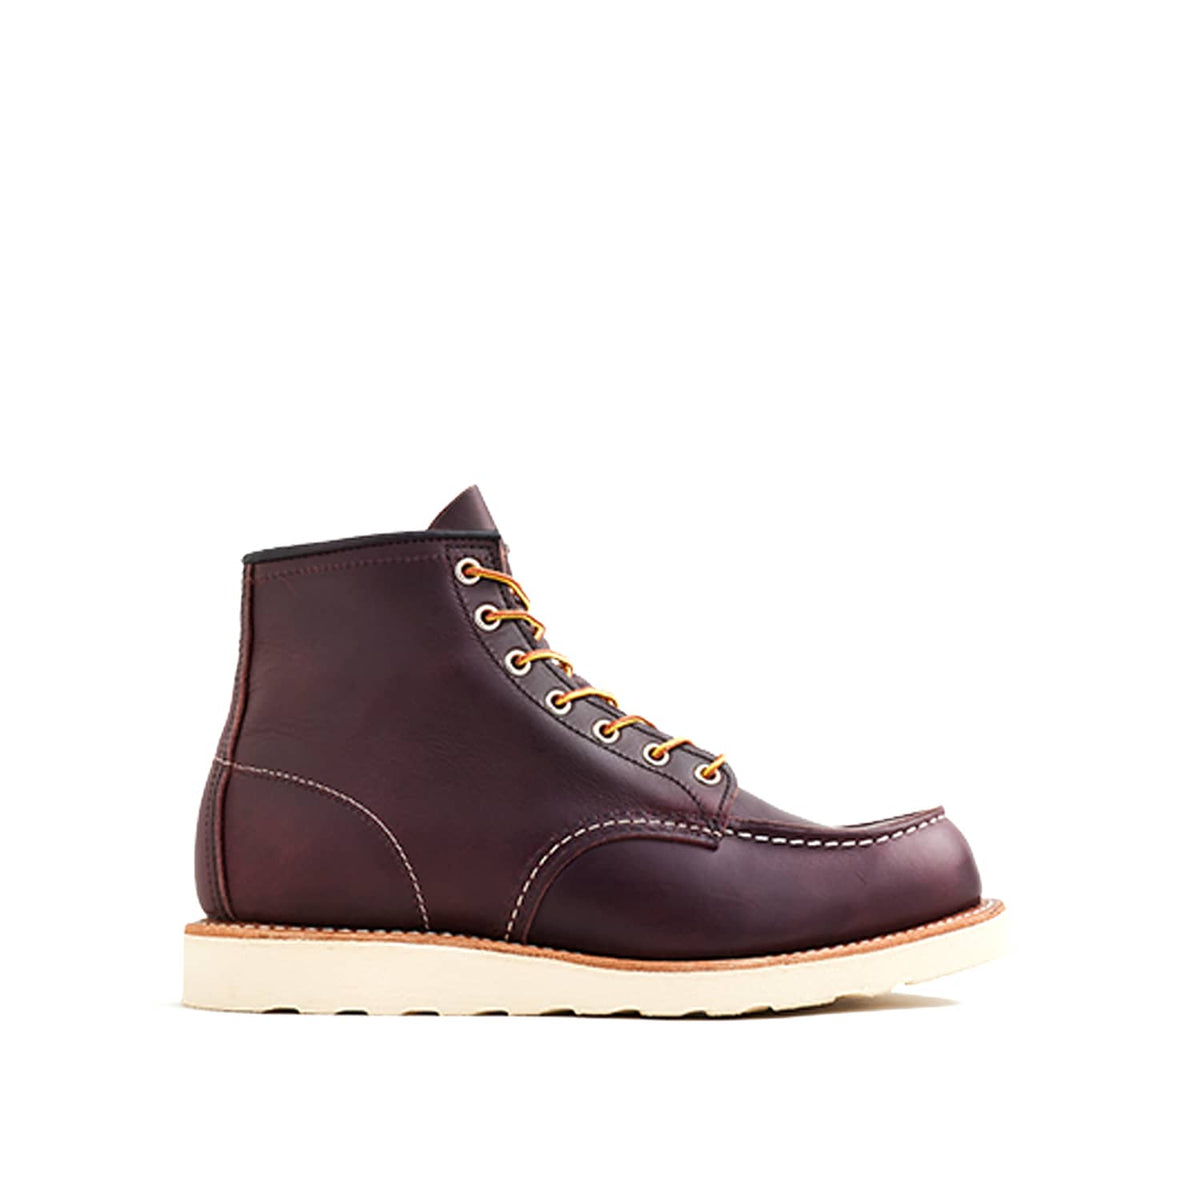 Red Wing Heritage 8847 6" Moc Toe Black Cherry